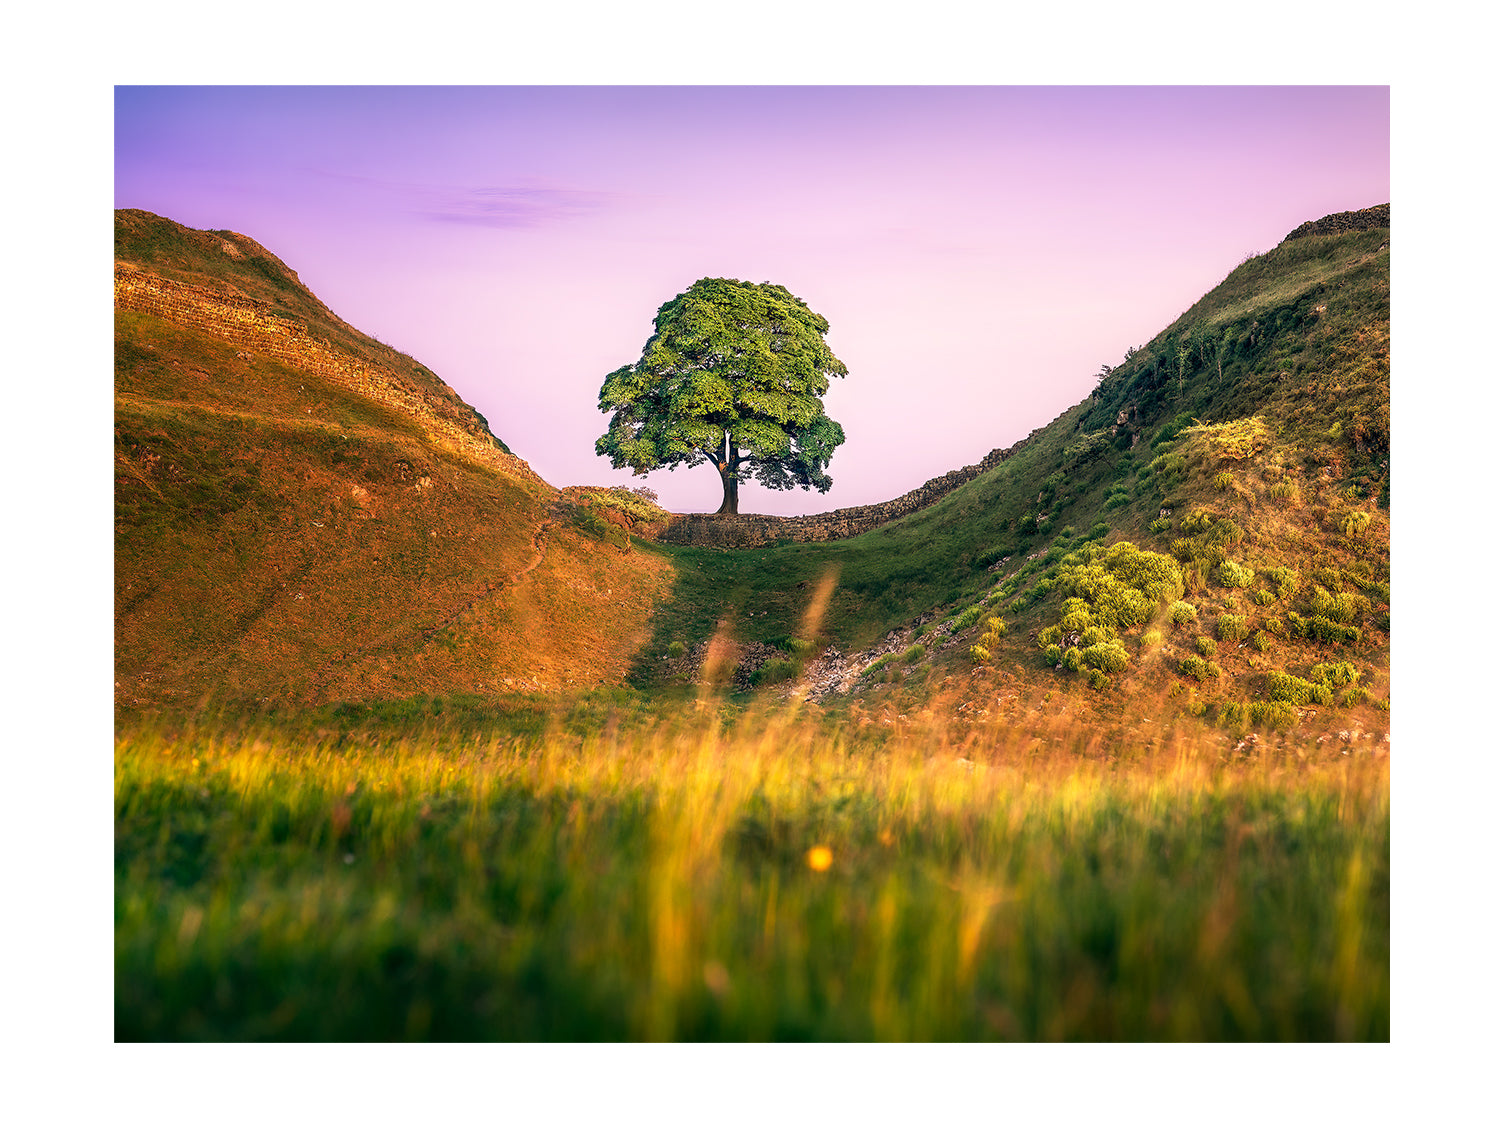 Sycamore gap's "Bliss"